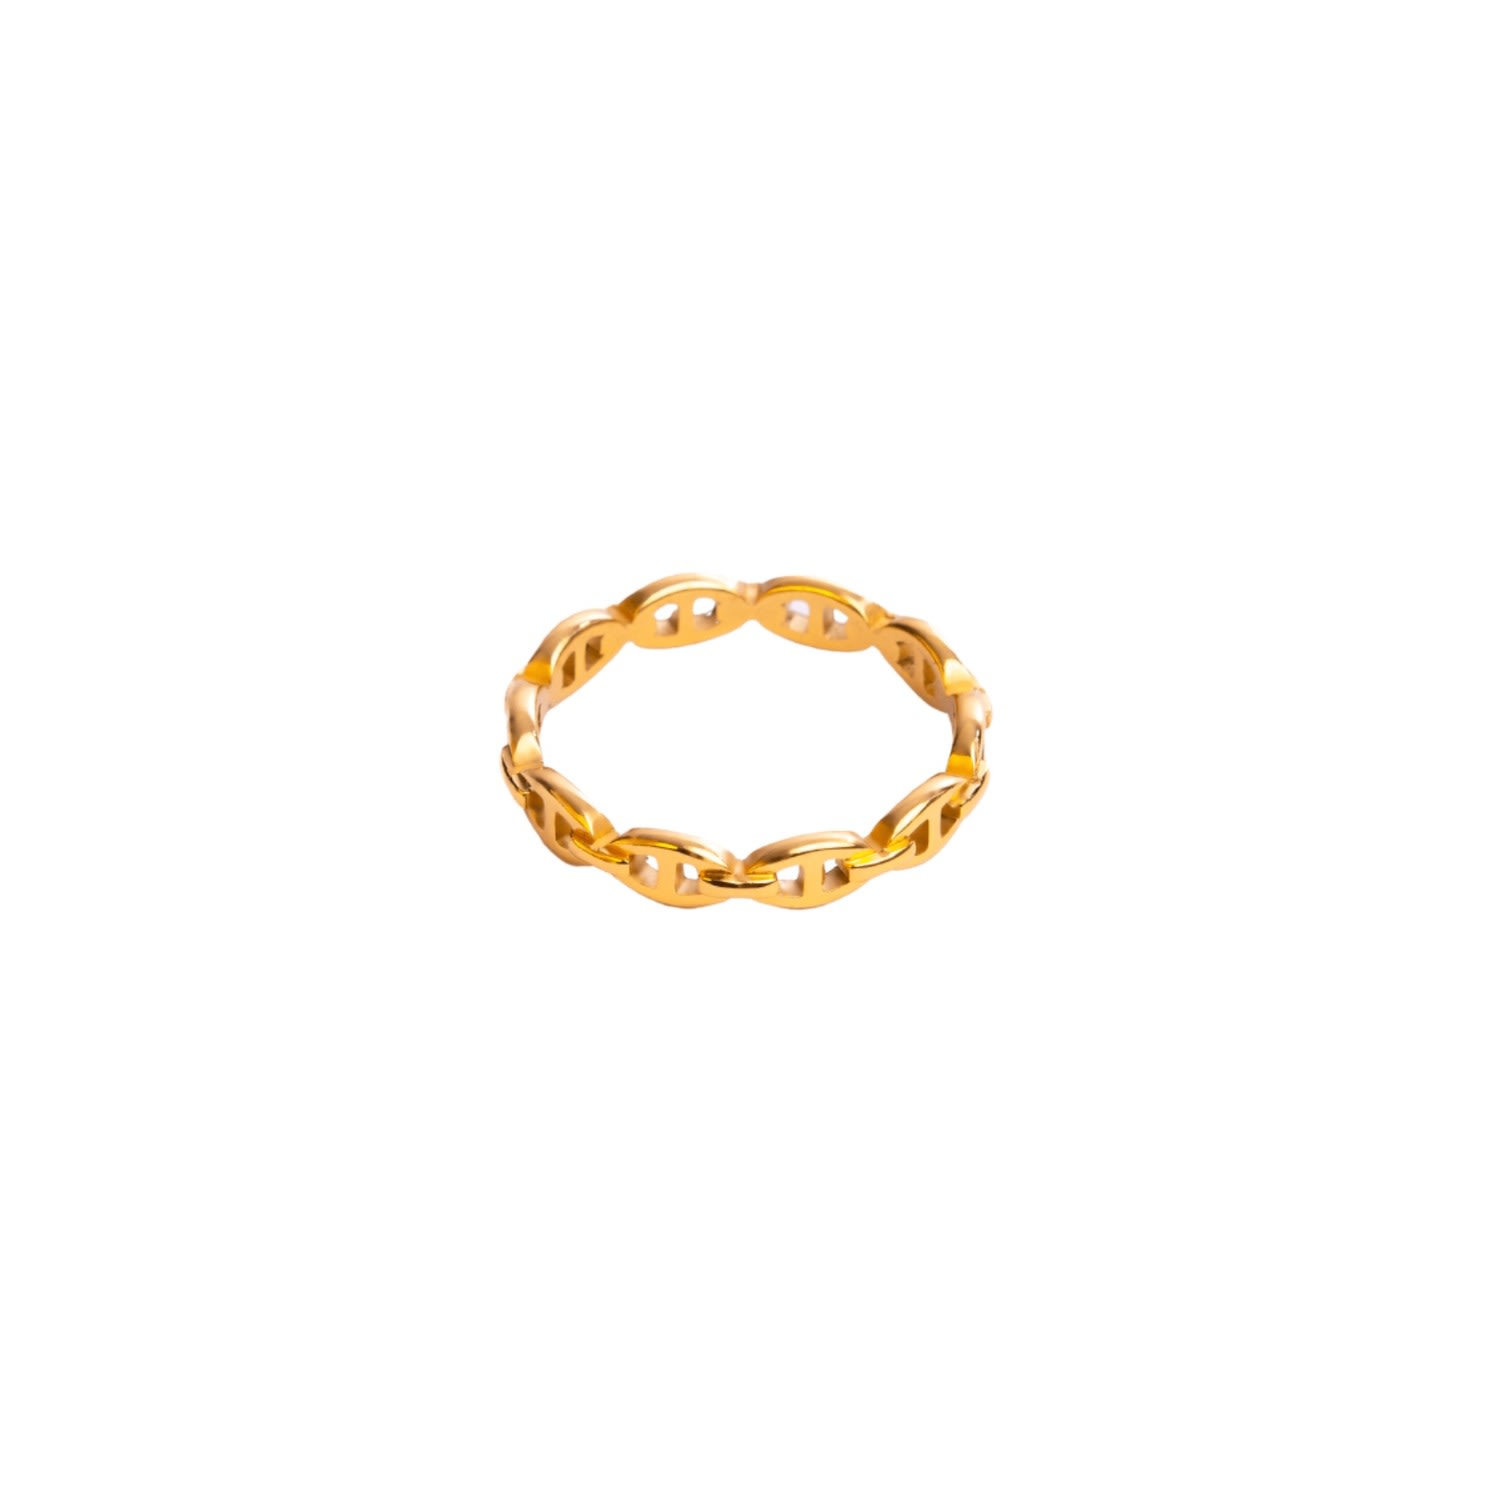 Tseatjewelry Women's Gold Amour's Ring